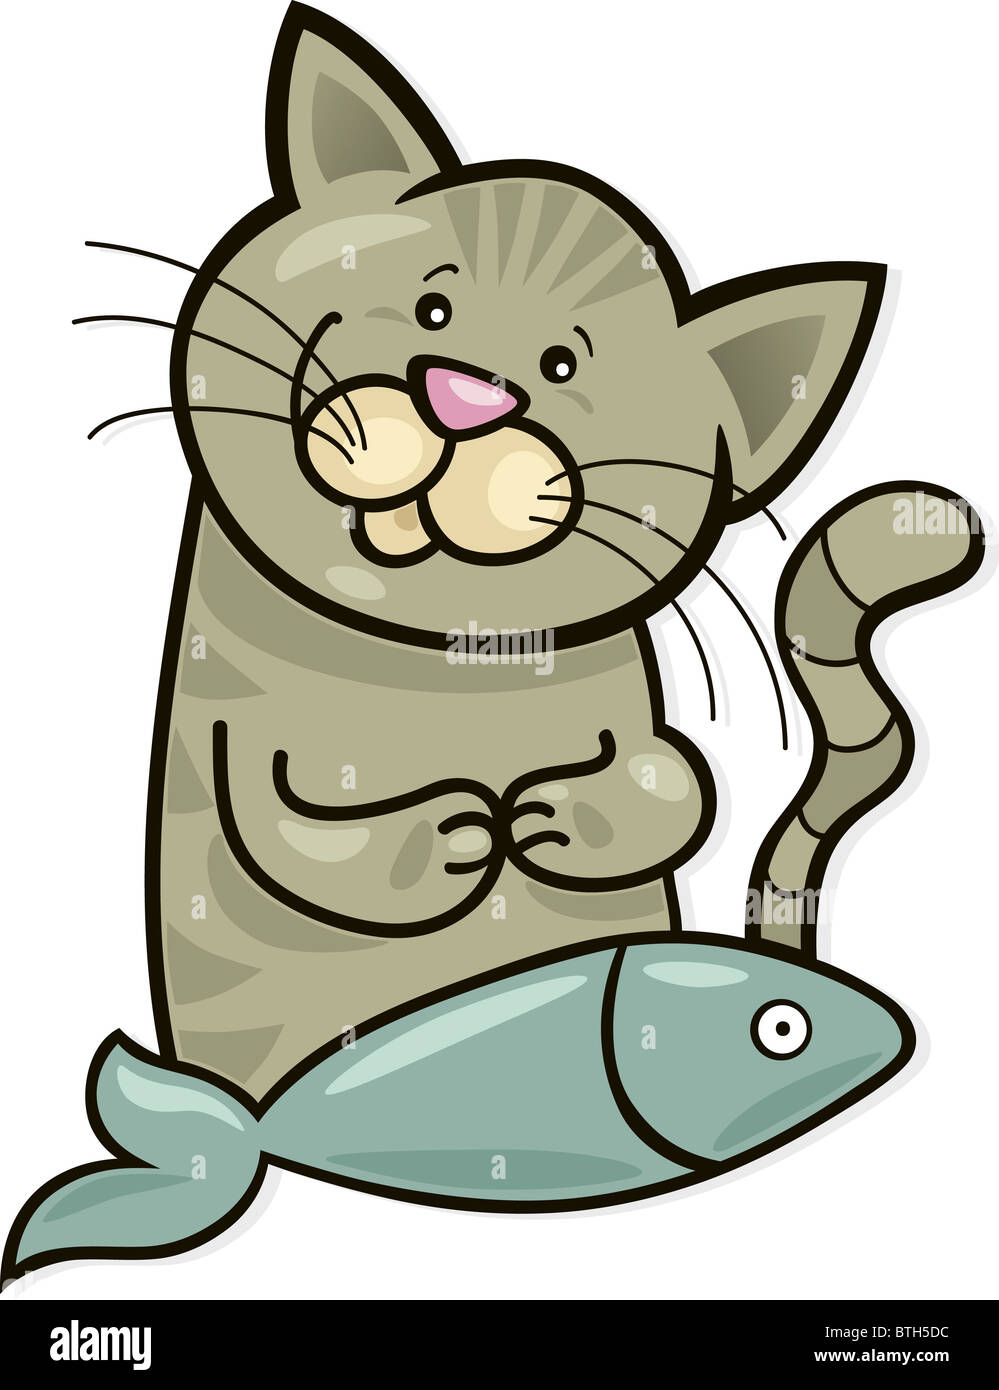 Illustration of happy cat with fish Stock Photo